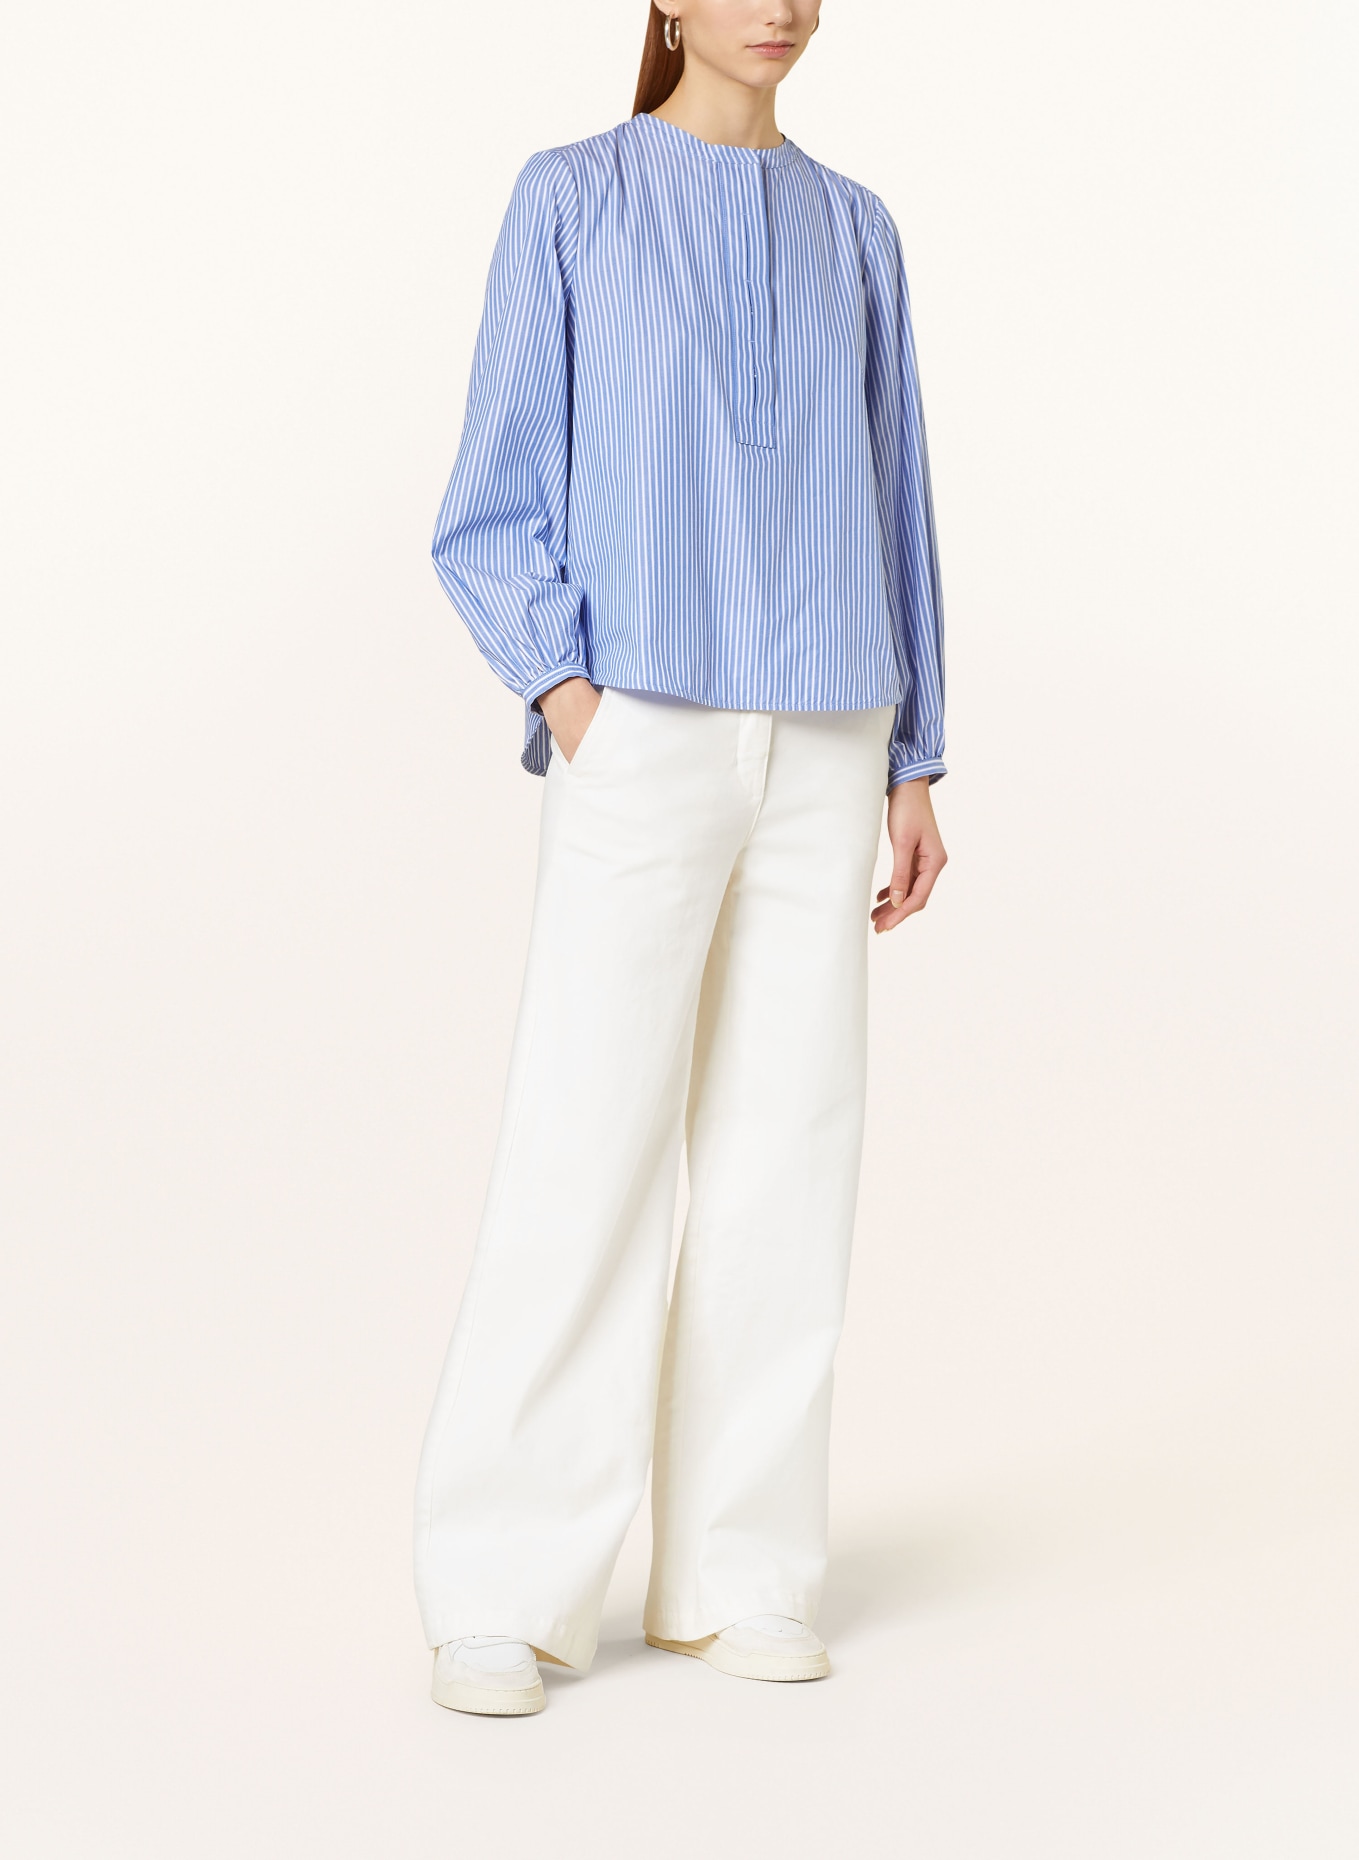 darling harbour Shirt blouse, Color: BLAU/WEISS (Image 2)